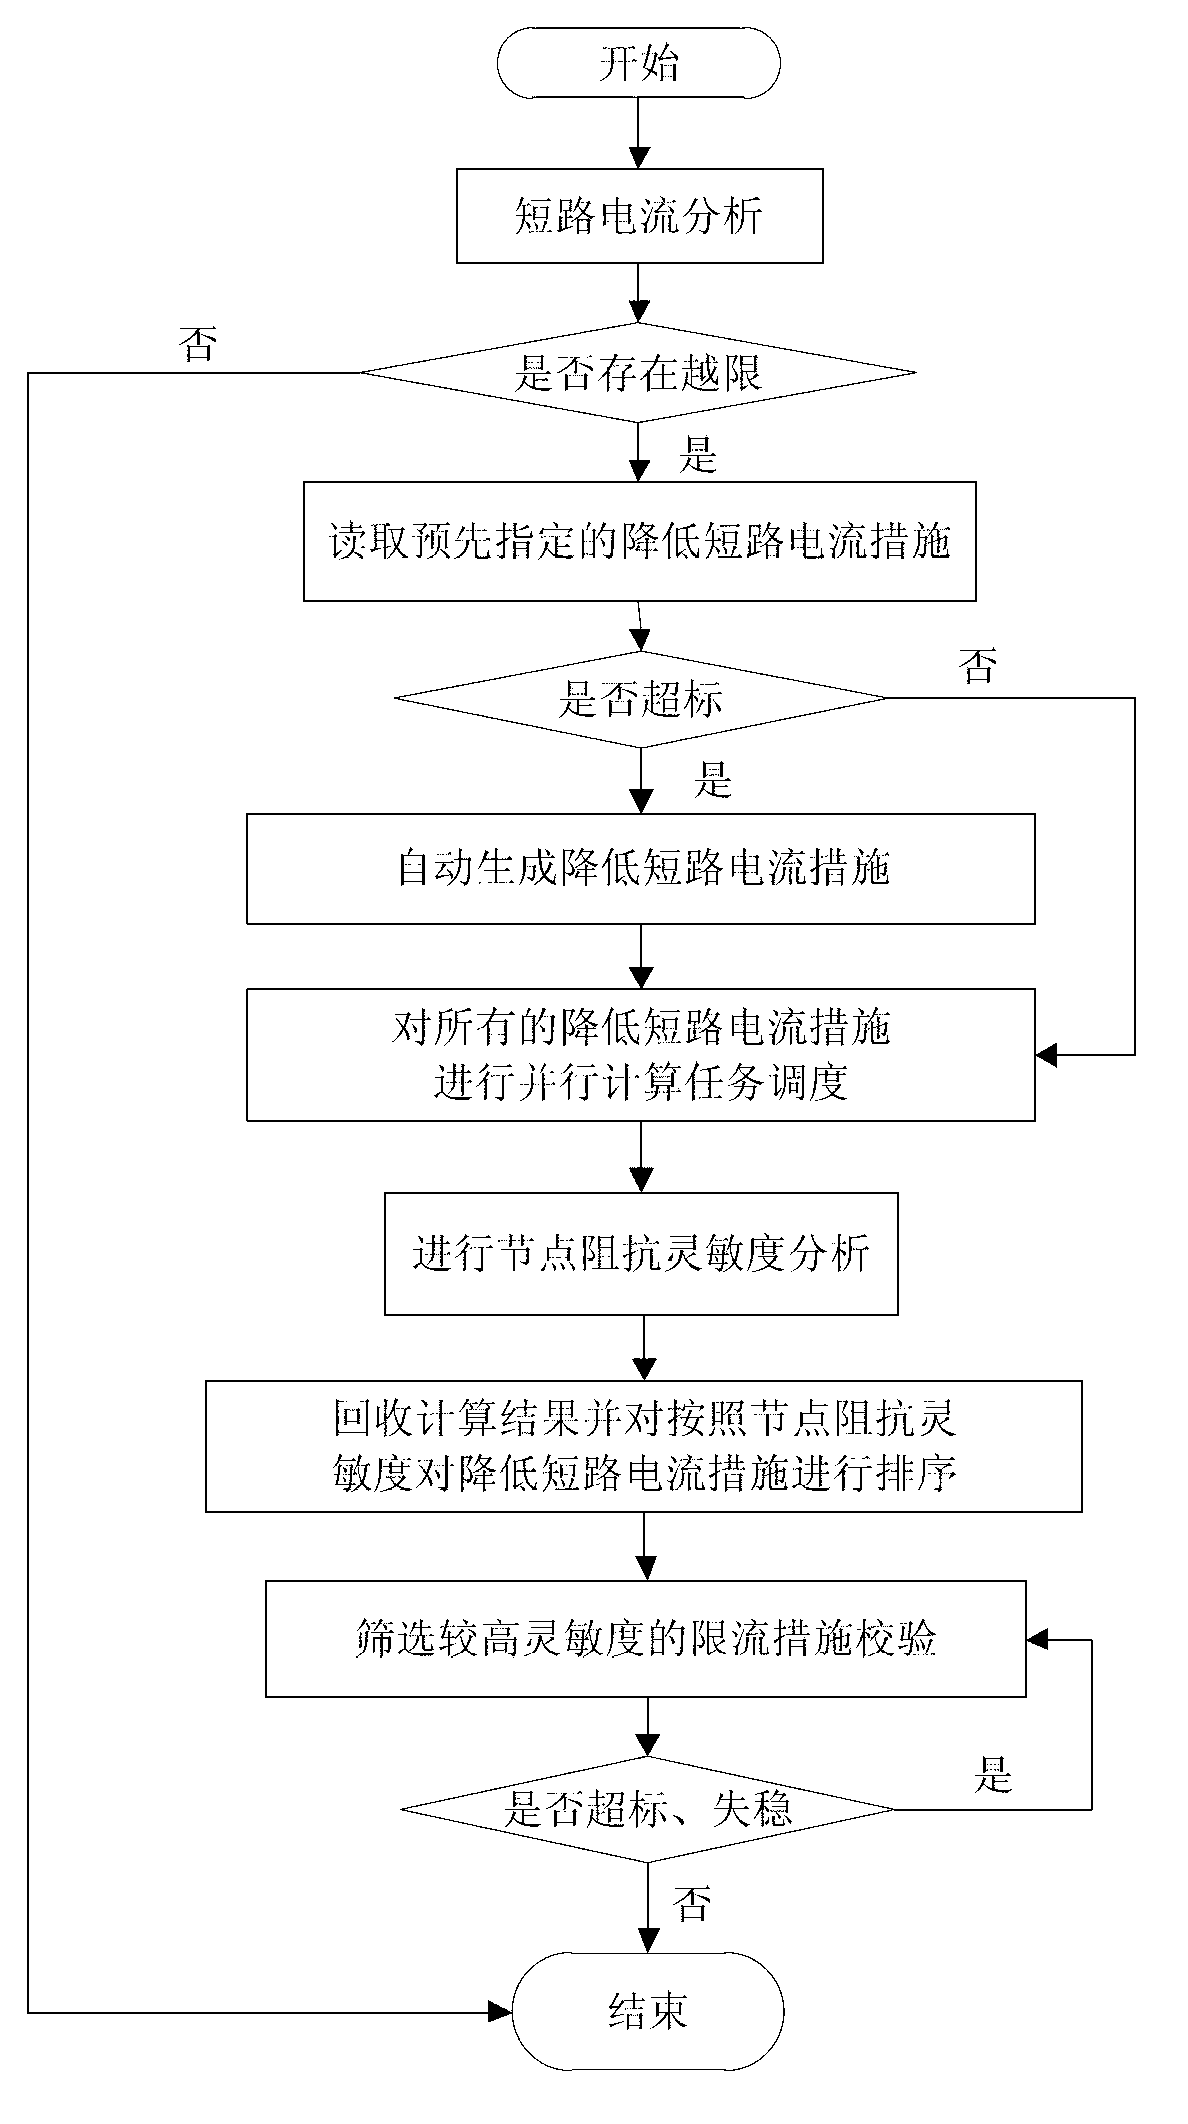 Short circuit current exceeding auxiliary decision method based on node impedance sensitivity